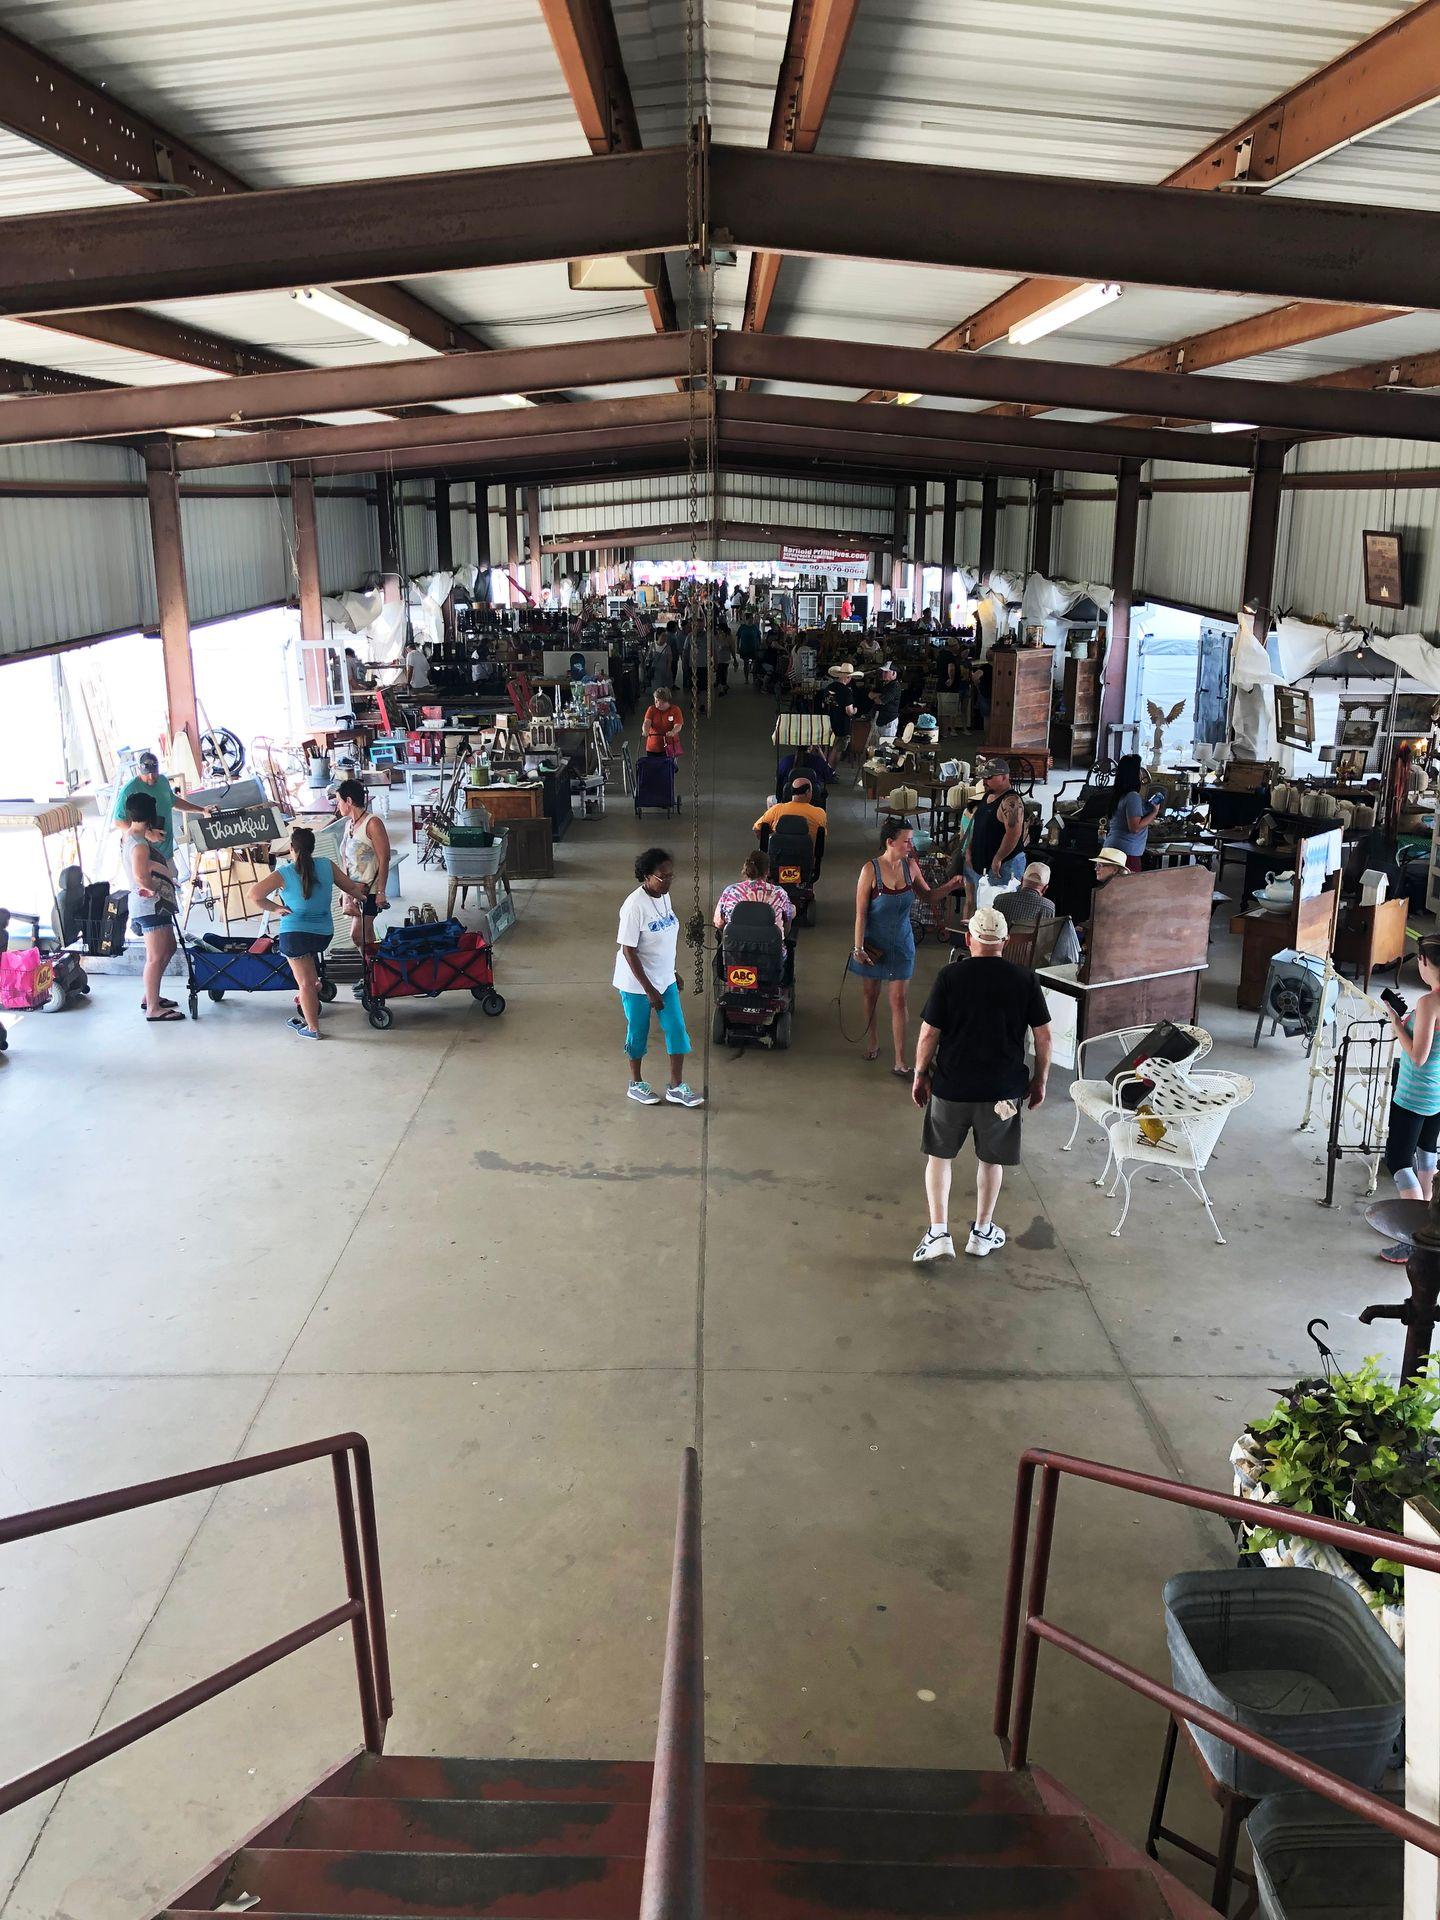 Looking down at a large hall in the Canton First Mondays flea market.